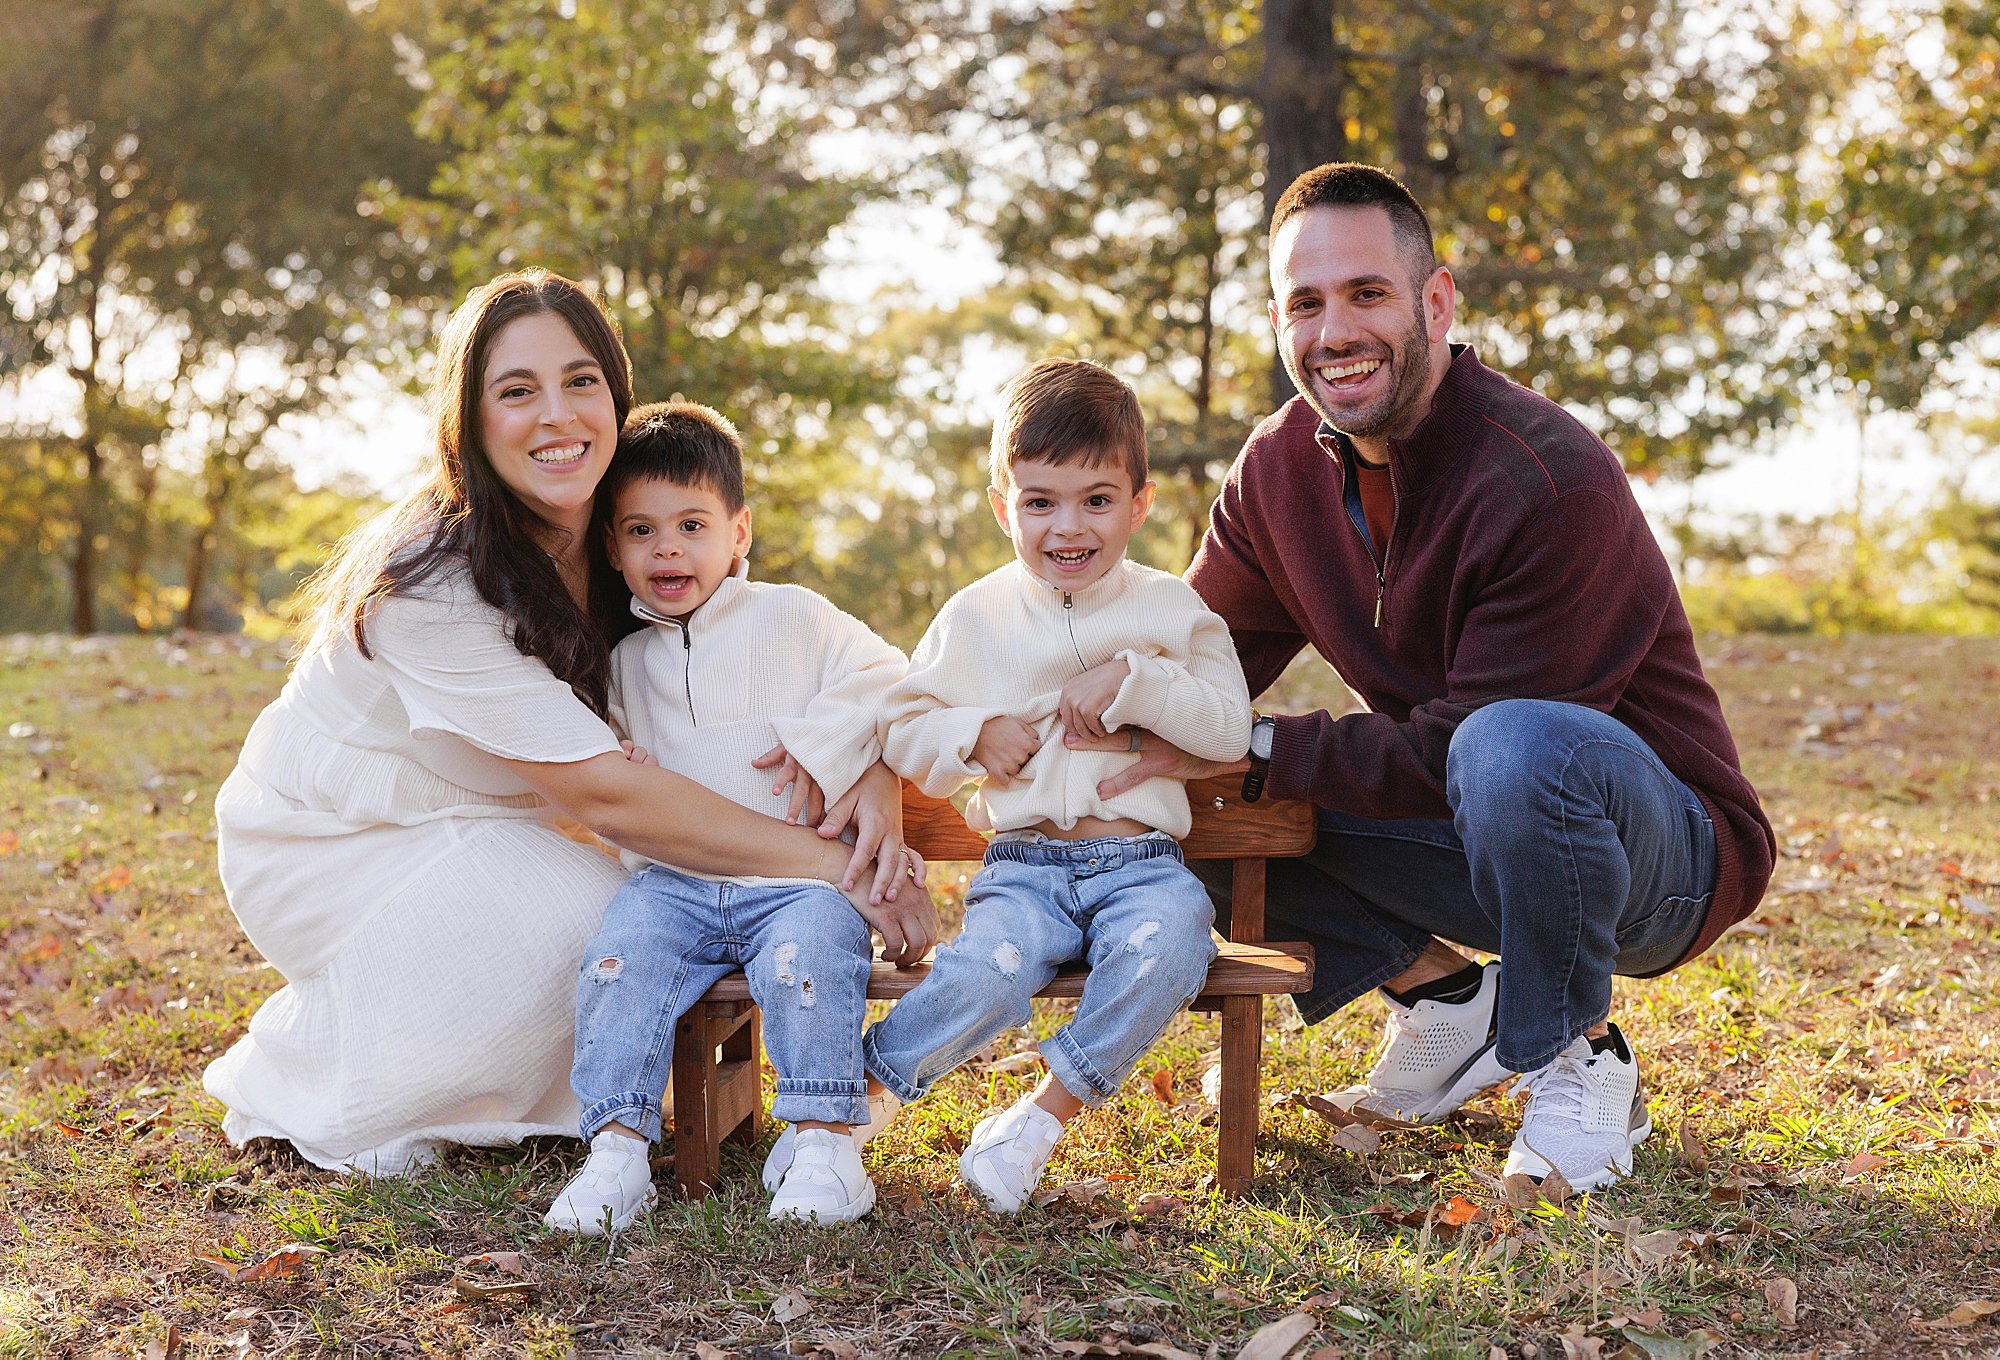  Family photo session with boy siblings sitting on a wooden bench in a park at sunset while their parents squat on either end taken near Atlanta, Georgia. 